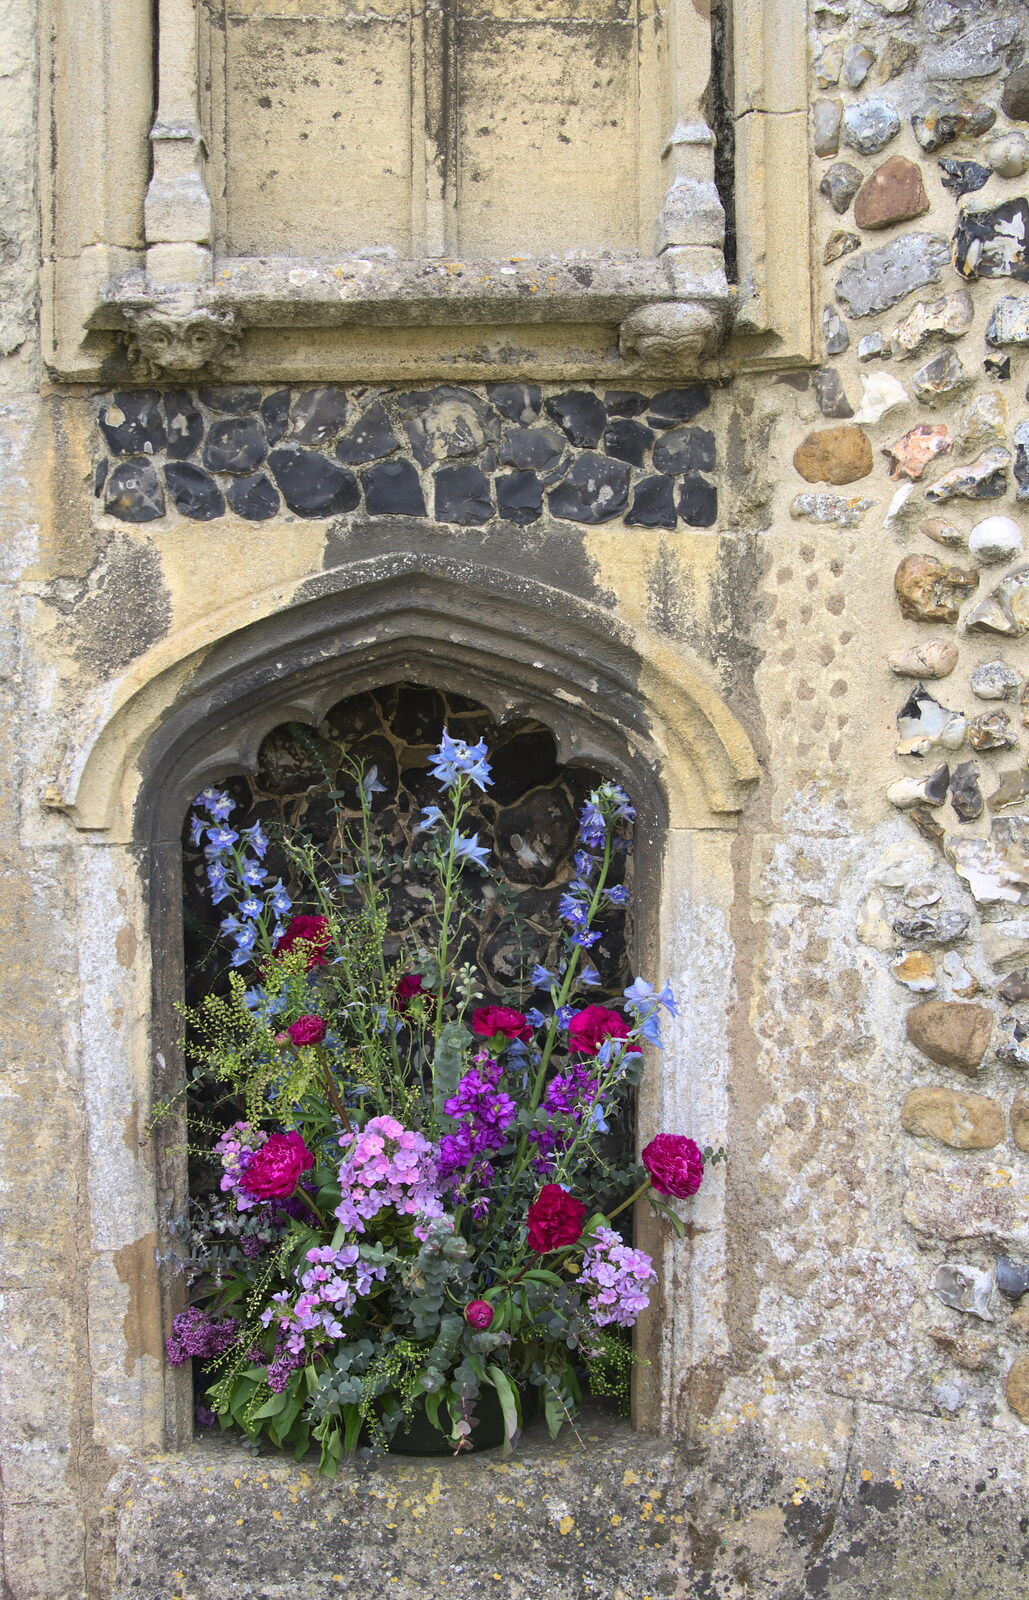 Nice flowers by the church entrance from A Postcard From Thaxted, Essex - 7th May 2017